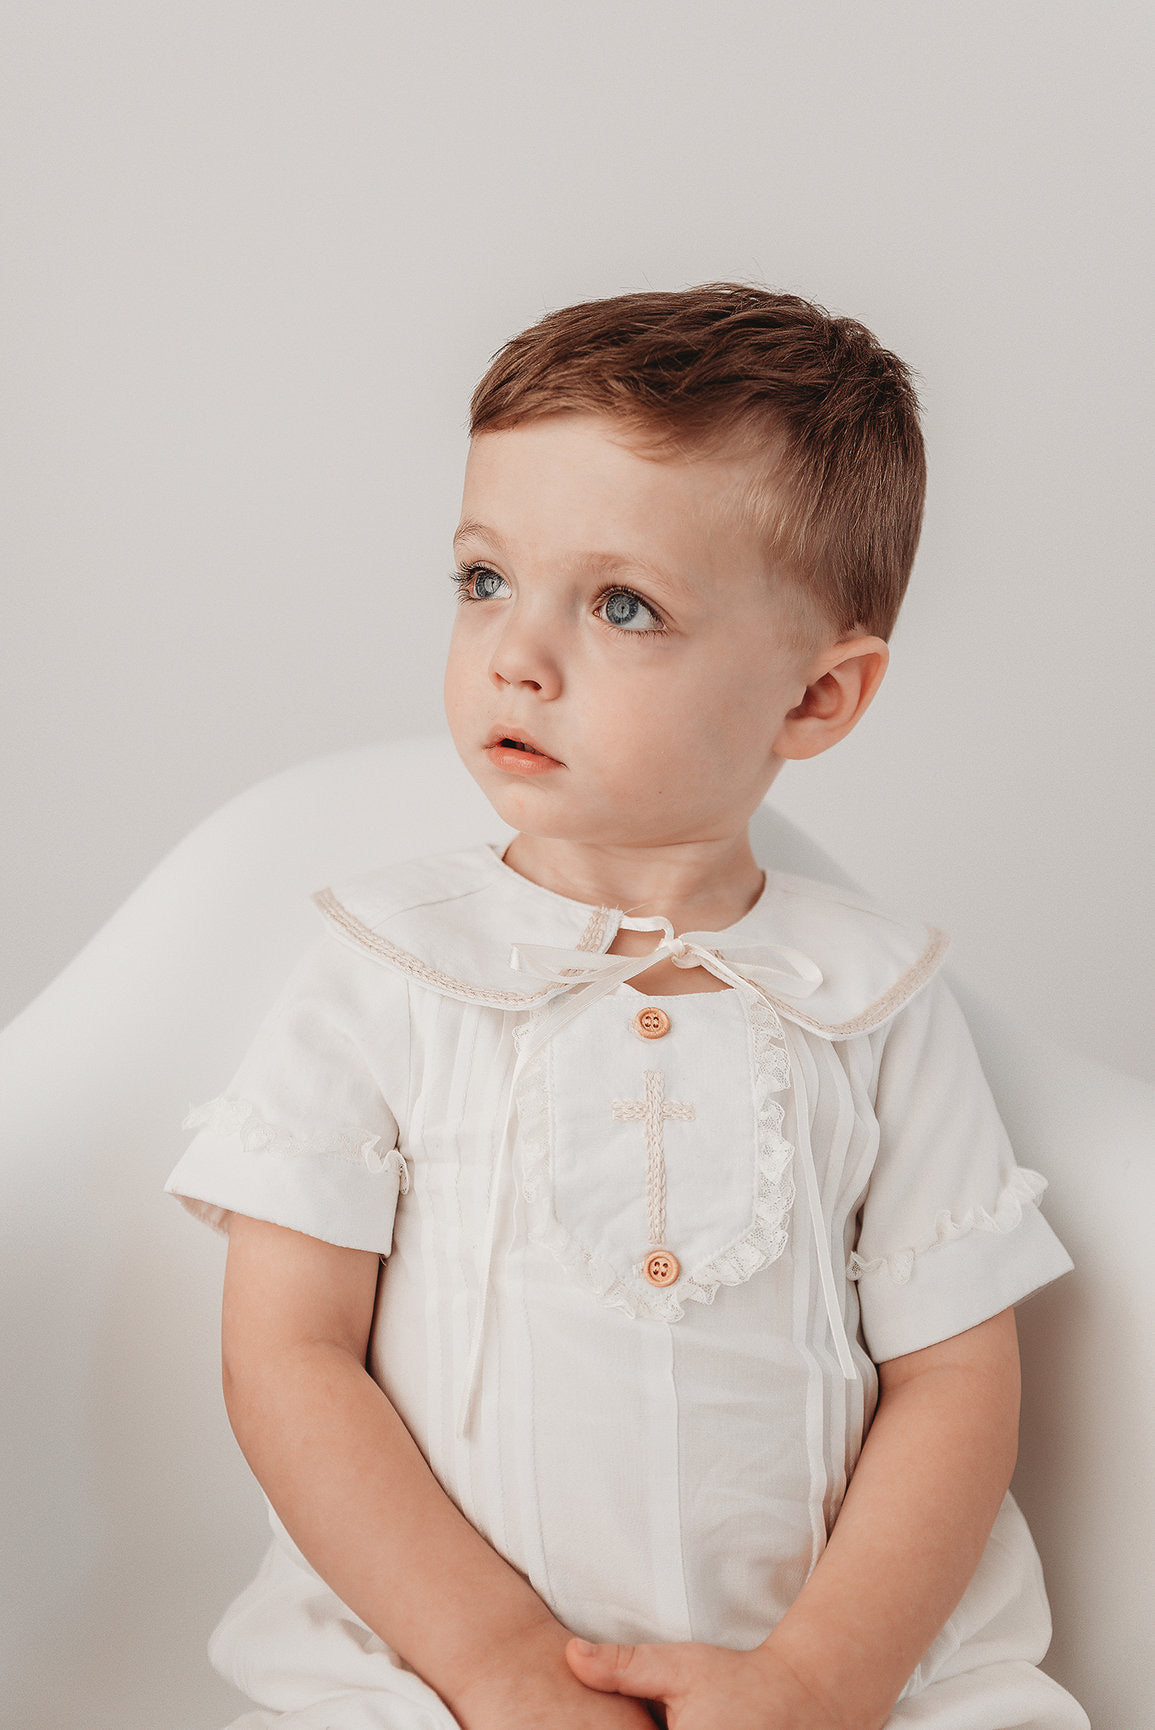 heirloom outfit piece for boys